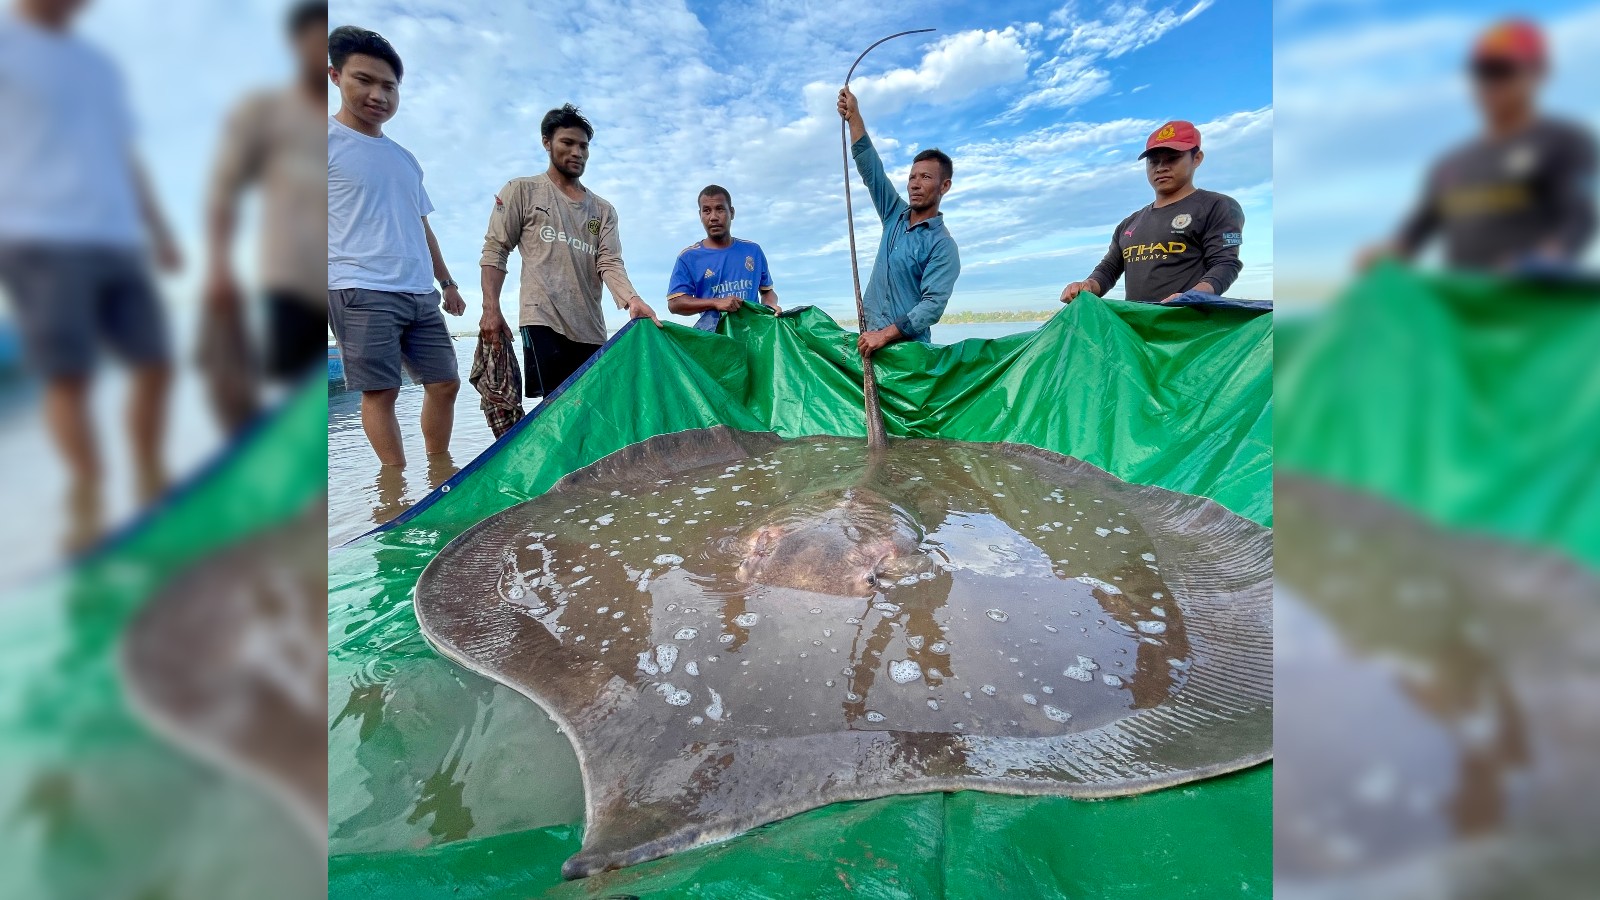 A giant 400-pound freshwater stingray caught in a net.